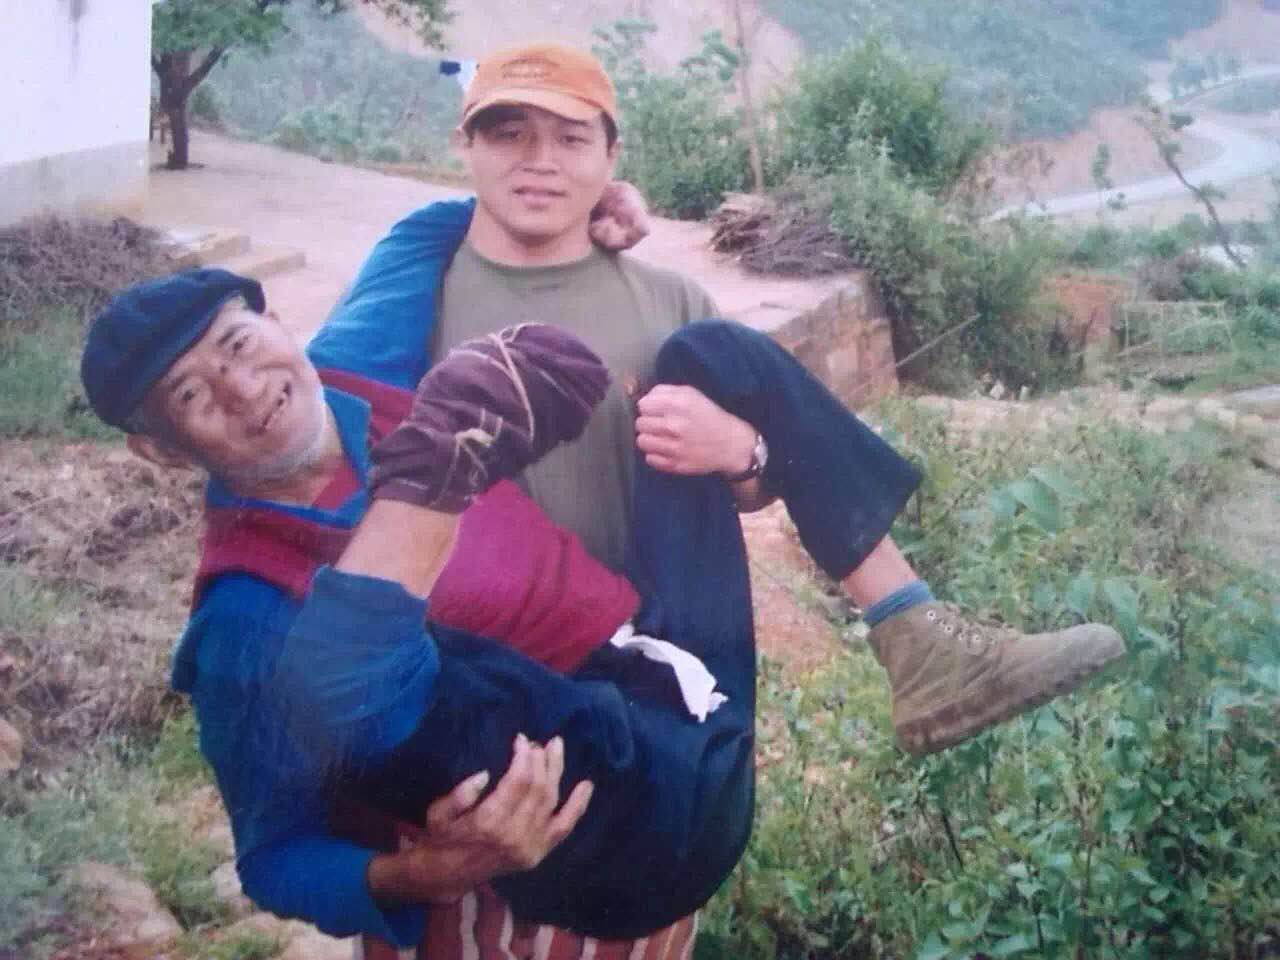 Brother Zheng carried a leprosy victim.